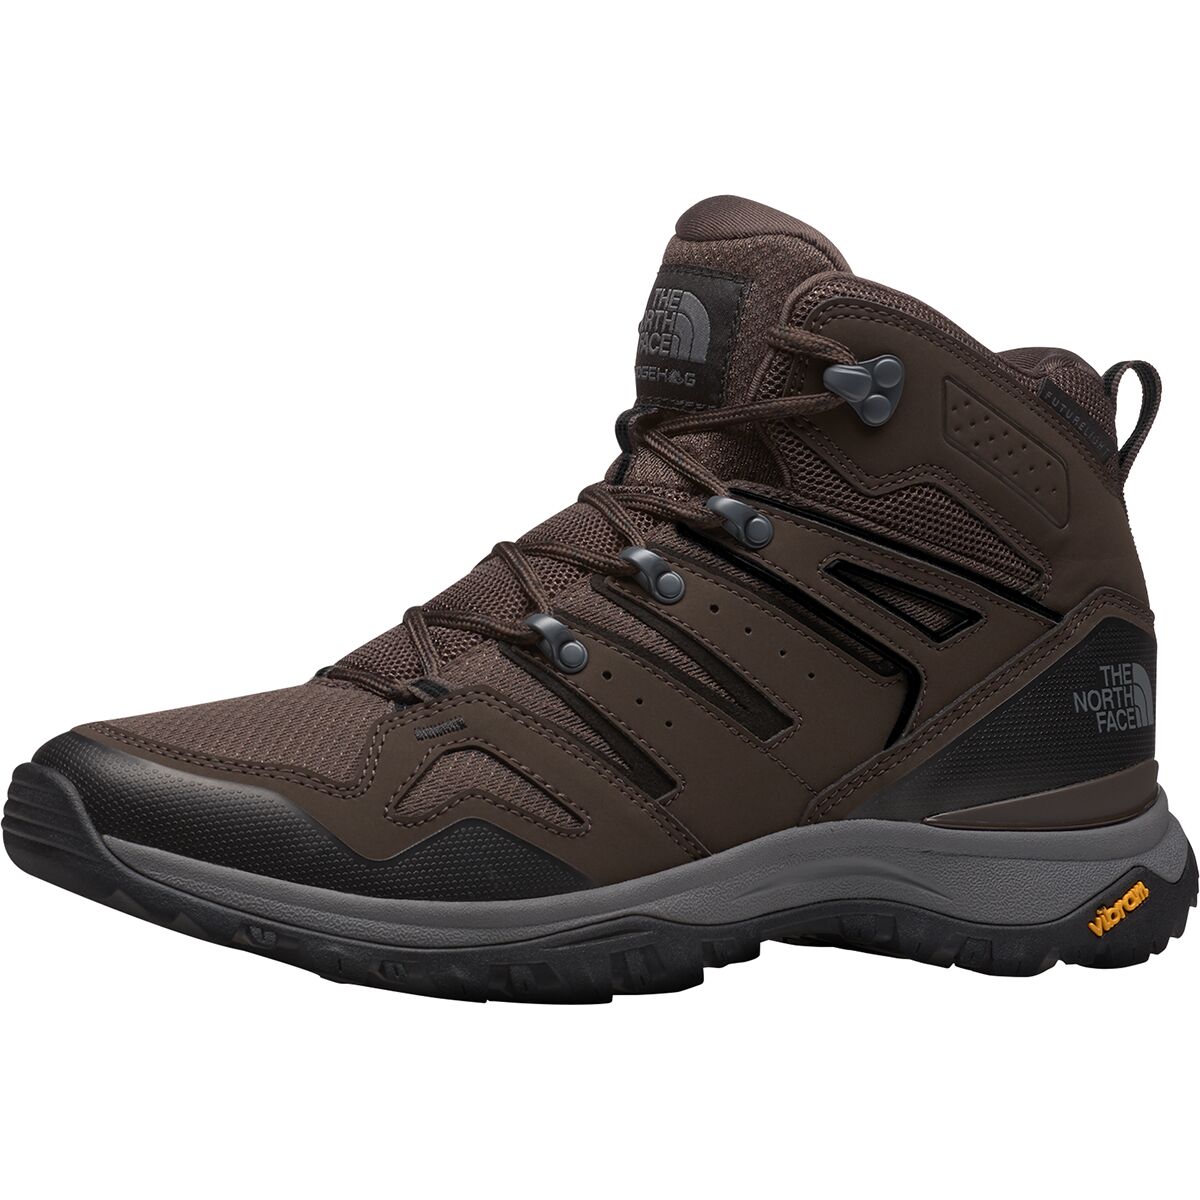 The North Face Hedgehog Mid FUTURELIGHT Hiking Boot - Men's